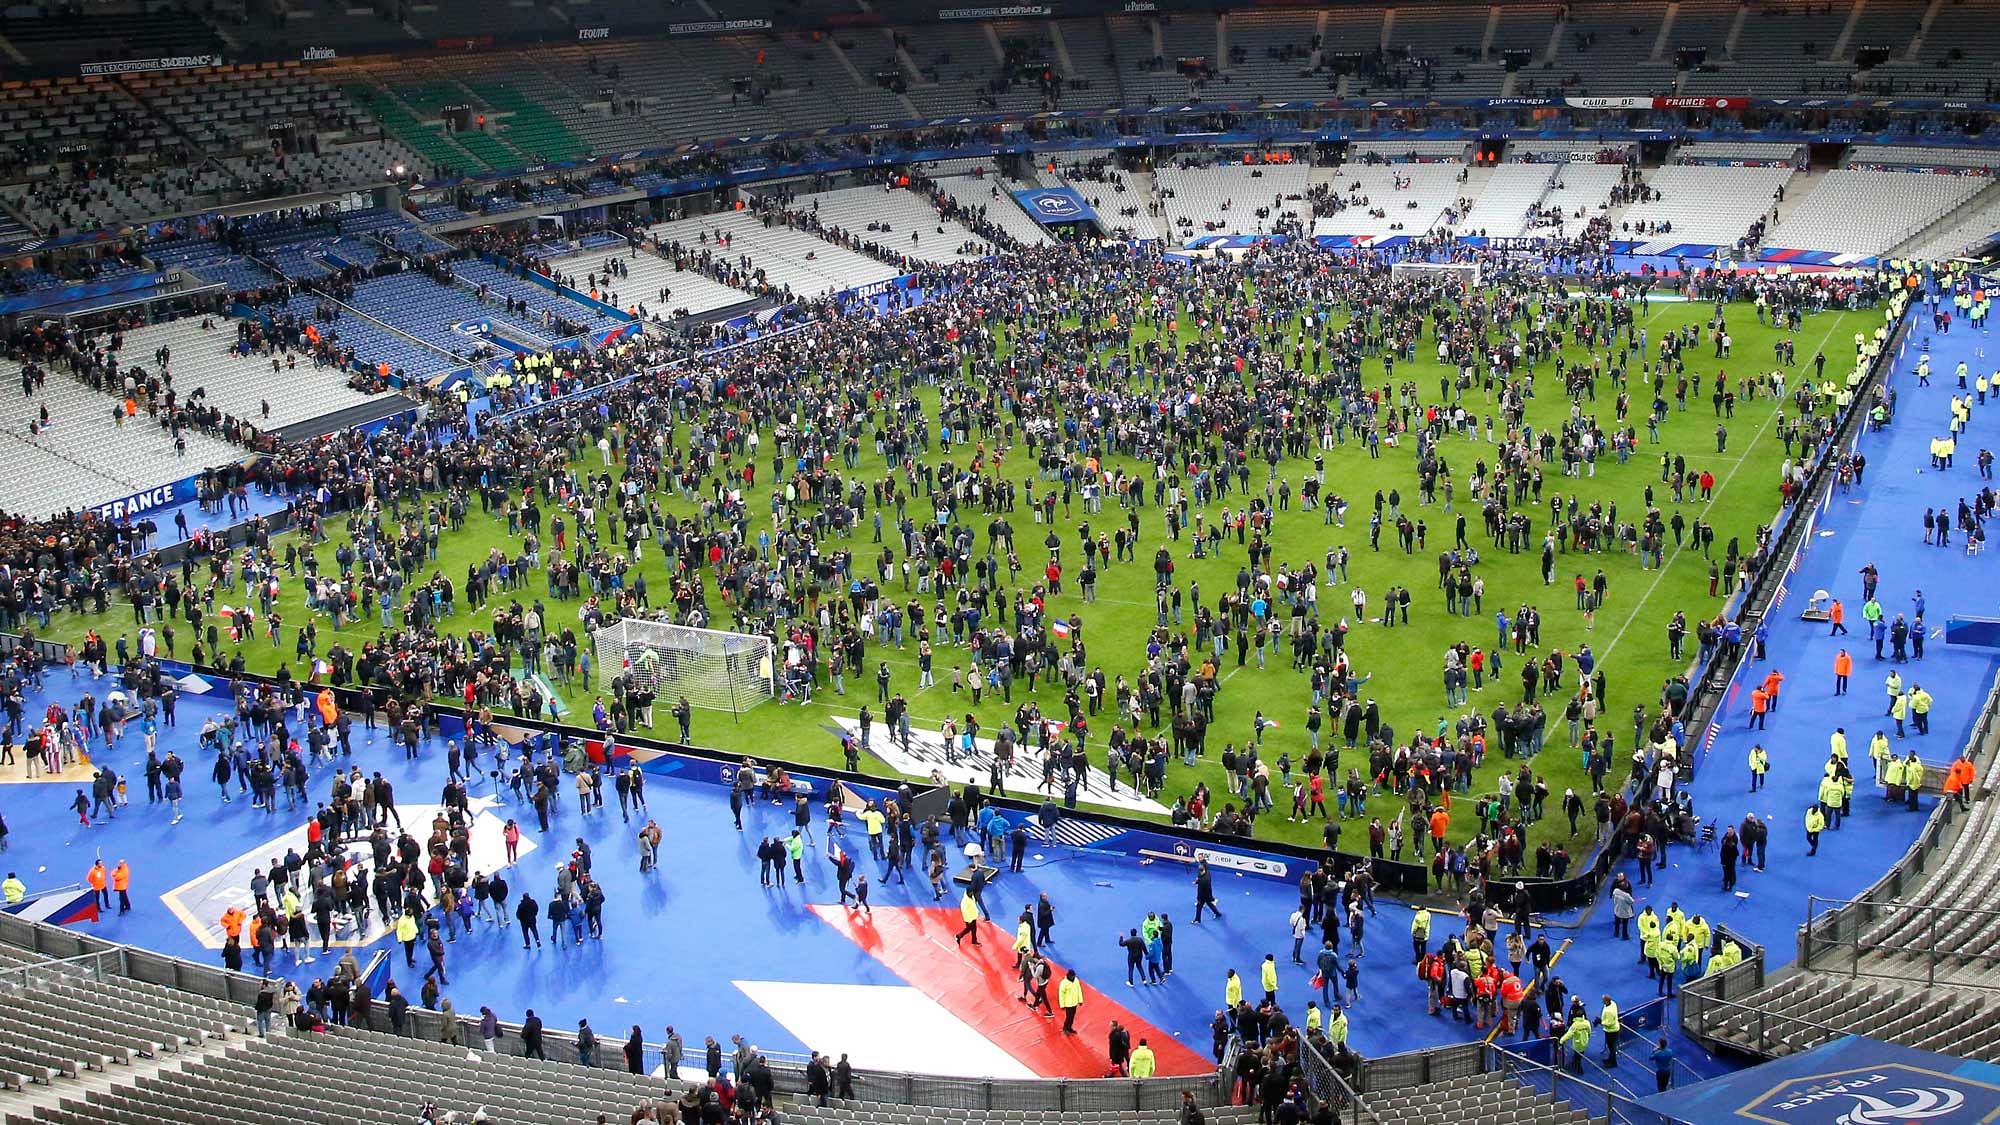 Spectators invaded the pitch of the Stade de France stadium after the friendly between France and Germany on Friday, Nov. 13, 2015. (Photo: AP)